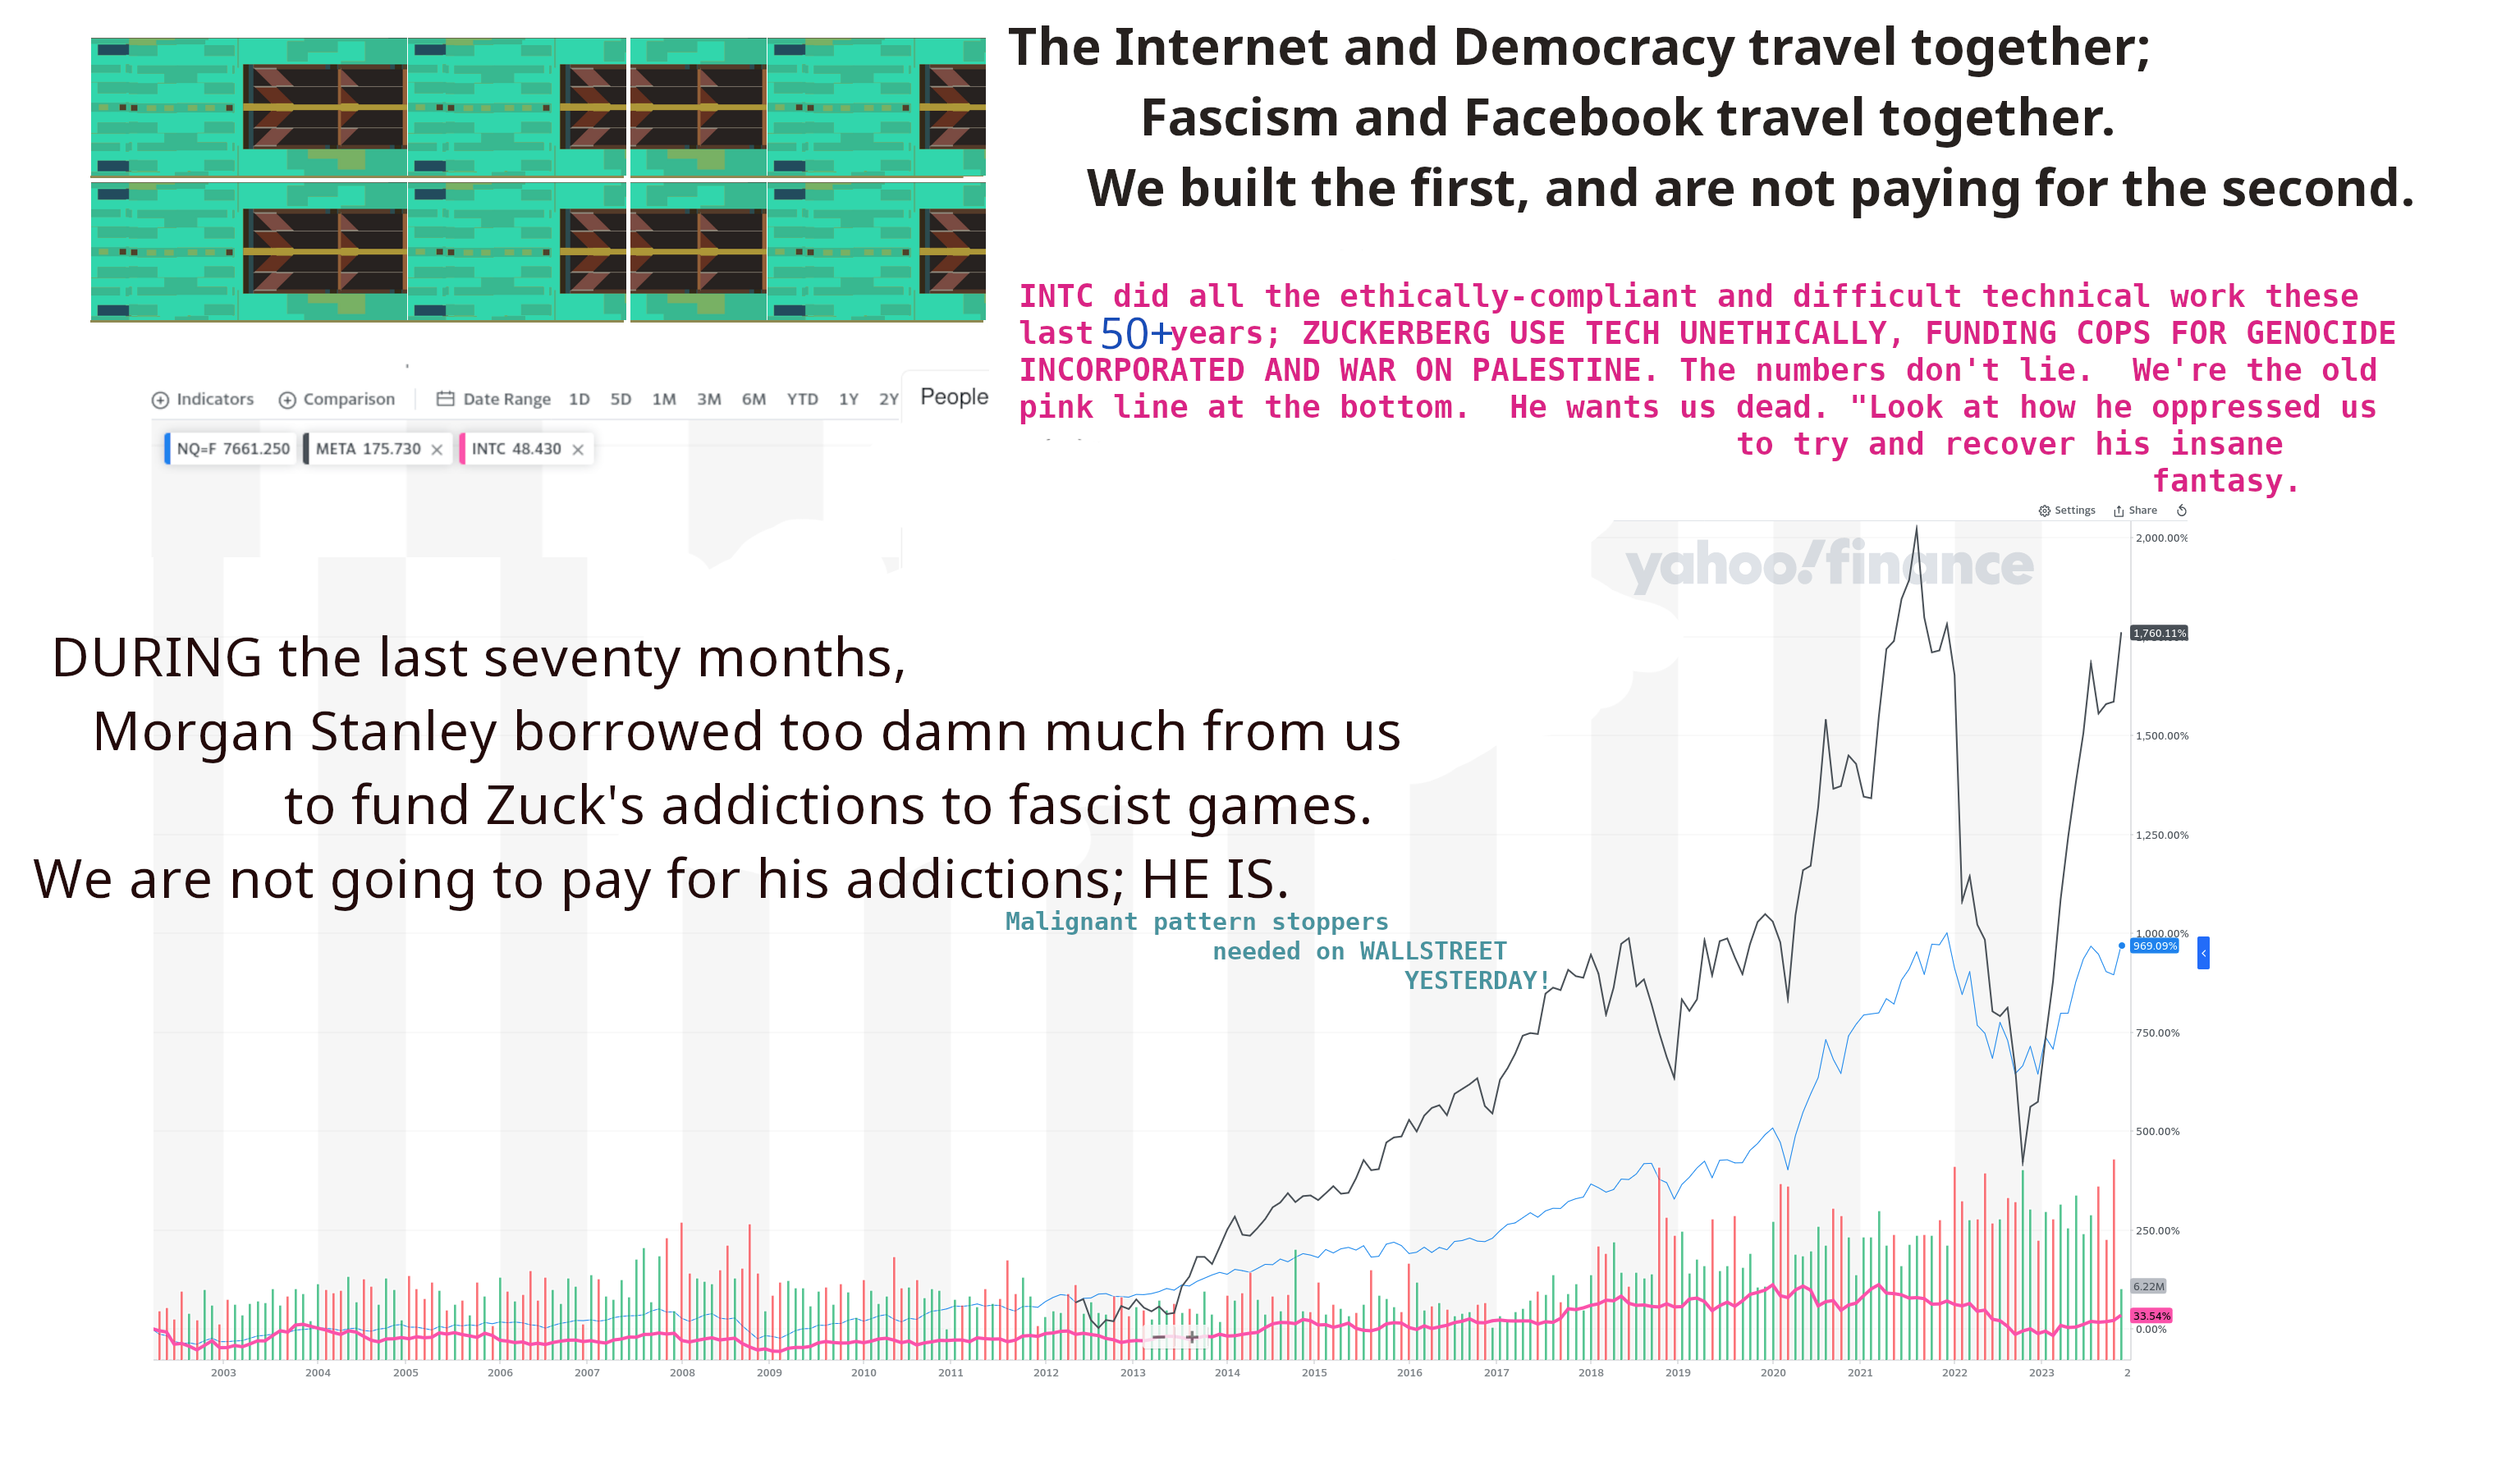 democracy travels with the Internet